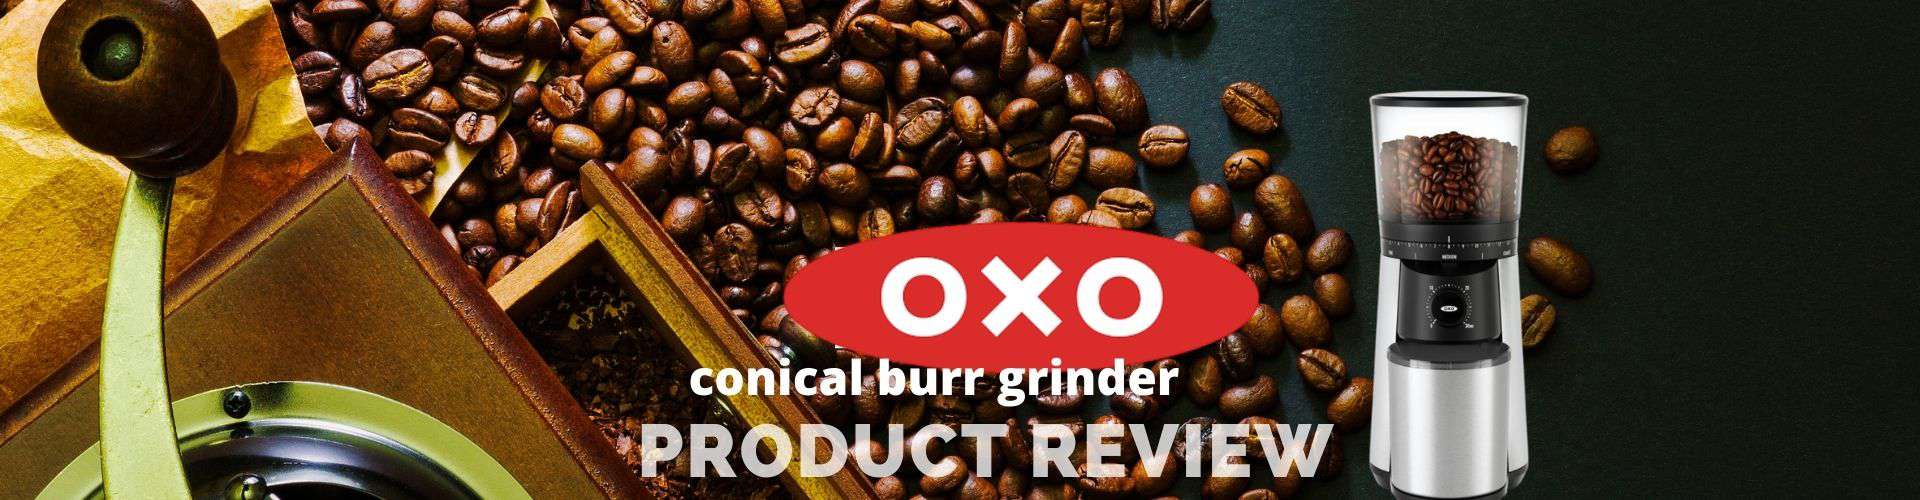 Oxo Conical Burr Grinder Review: Can it Grind Coffee Best?